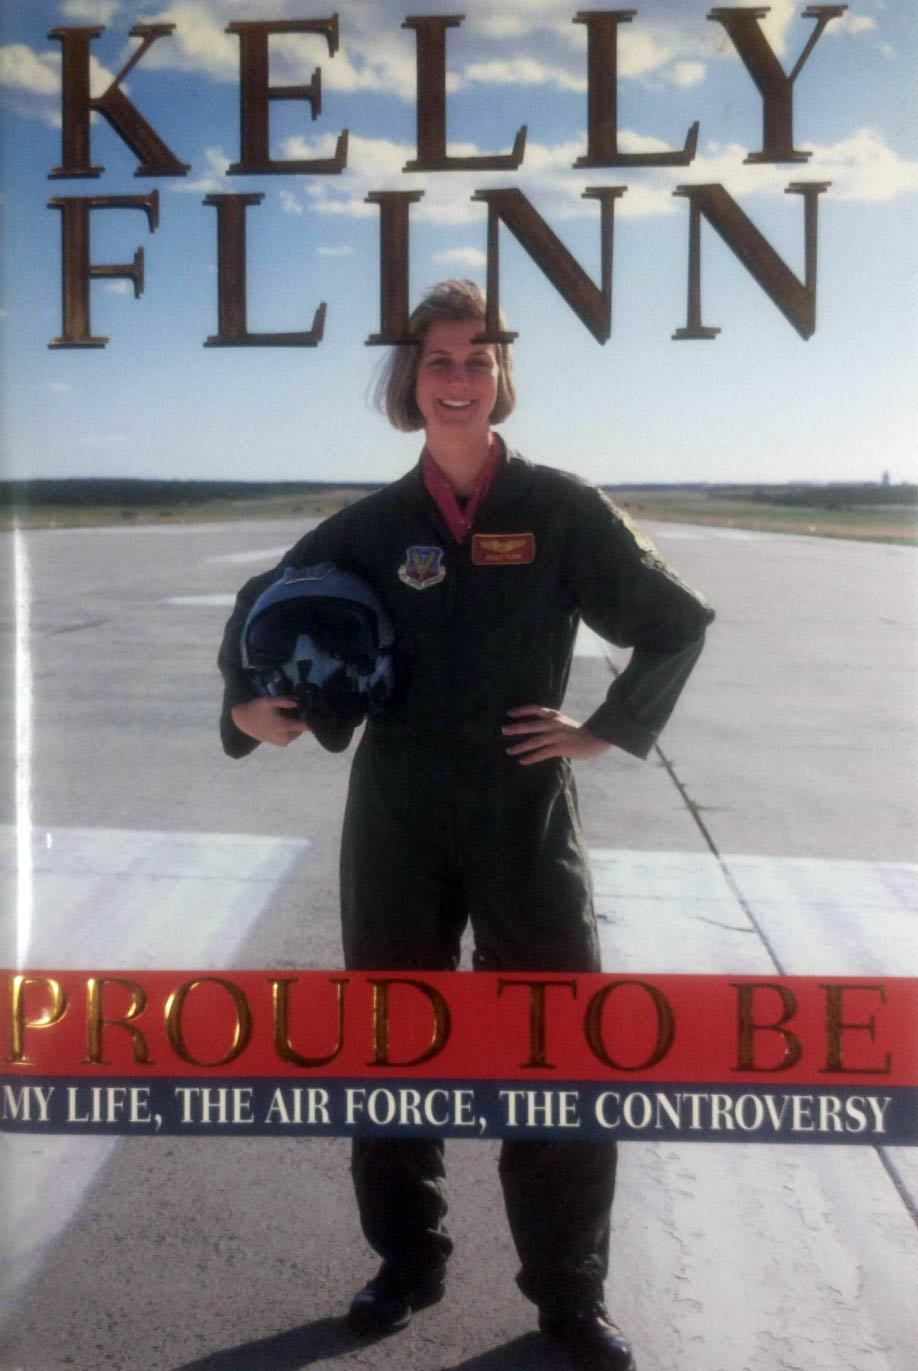 Primary image for Proud to Be: My Life, The Air Force, The Controversy by Lt. Kelly Flinn / 1997 